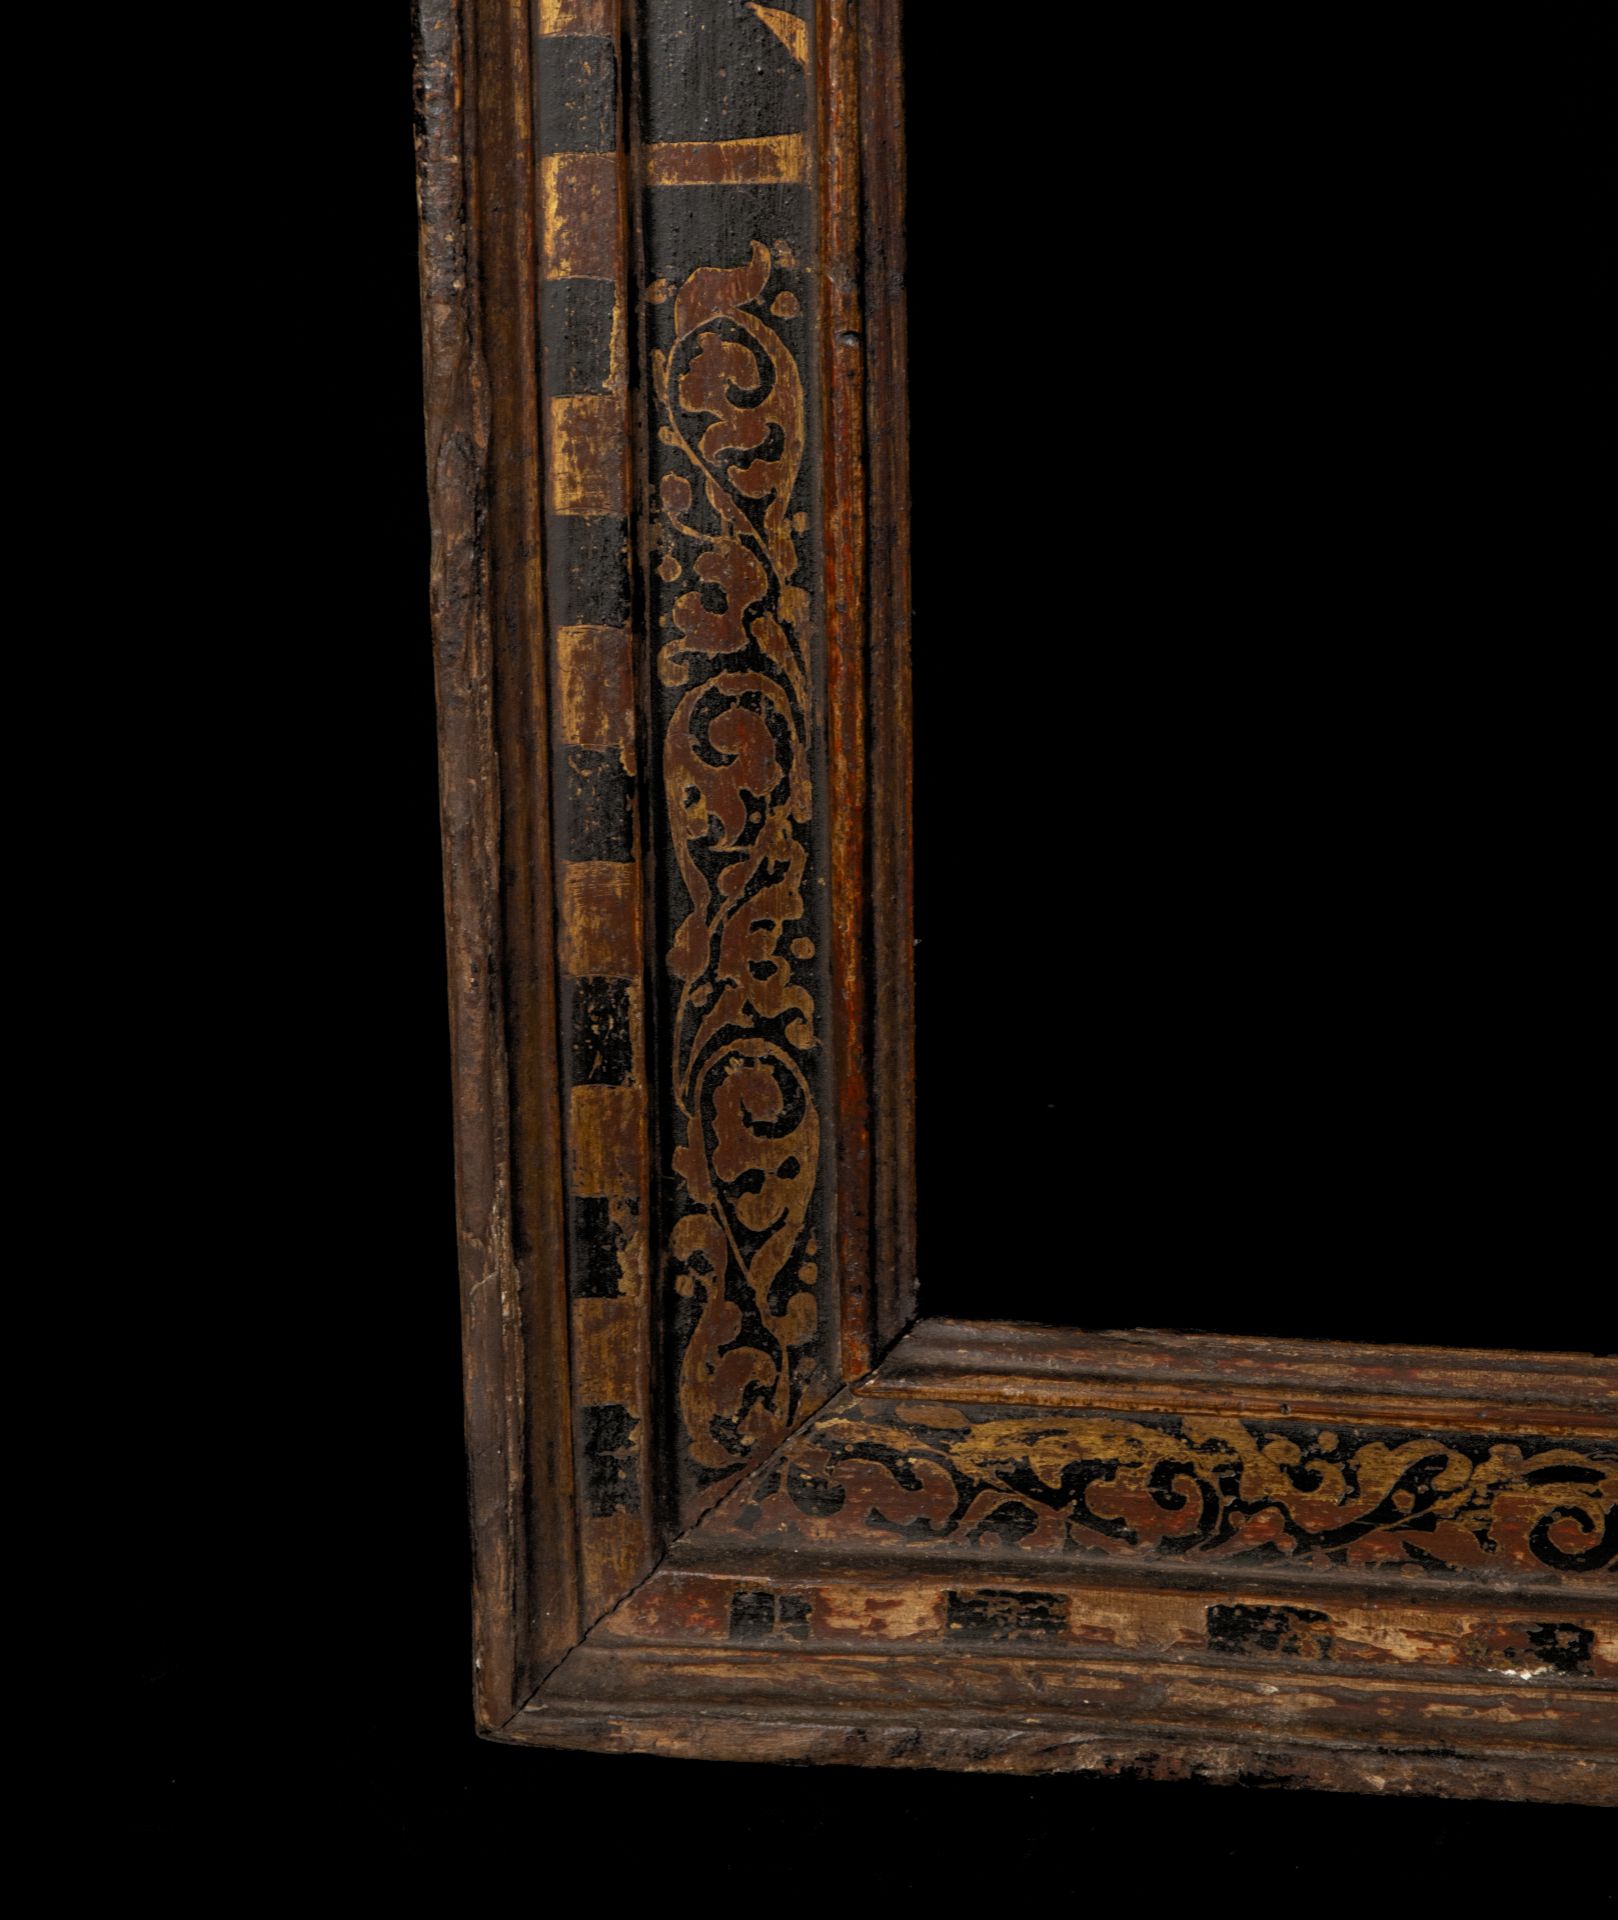 Spectacular antique sgraffito frame from the 16th century Hispanic Flemish from the 16th century - Image 4 of 7